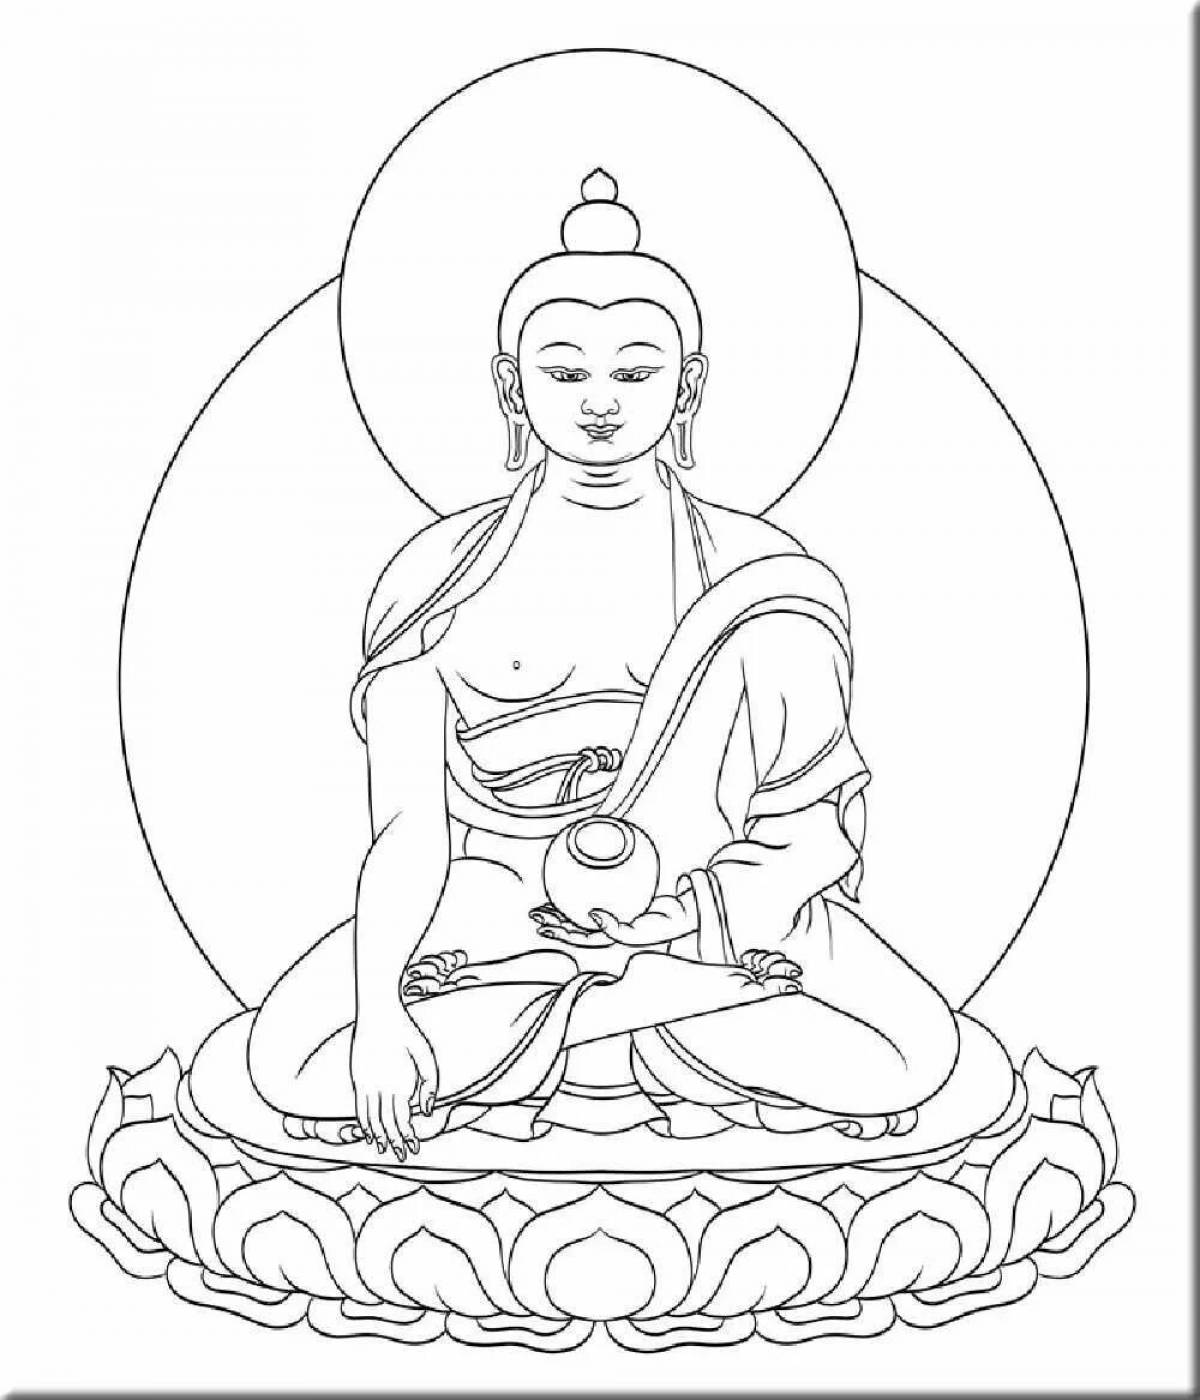 Brilliant buddhism coloring page